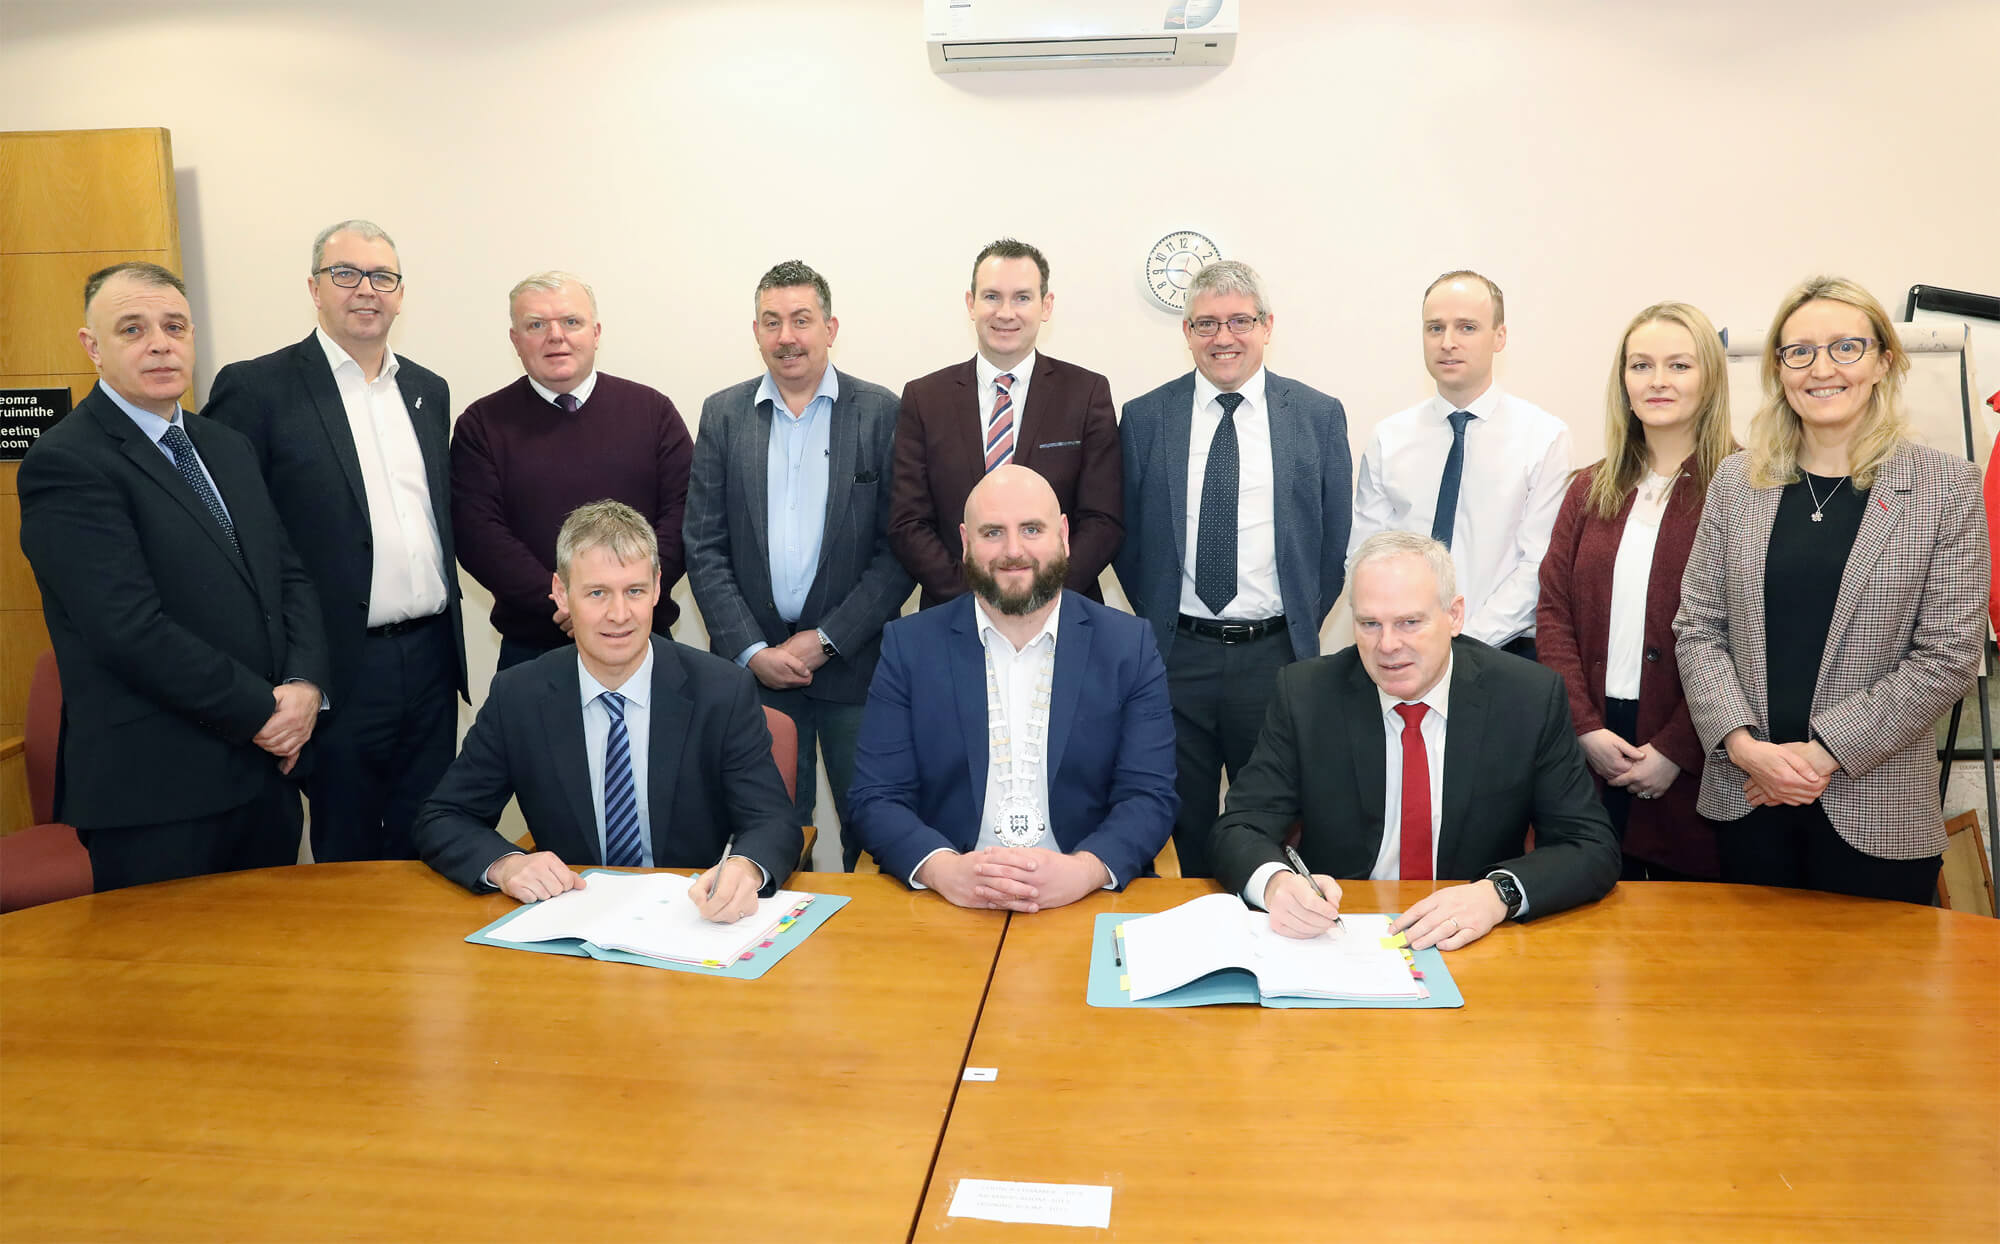 N16 - Contract Signing 